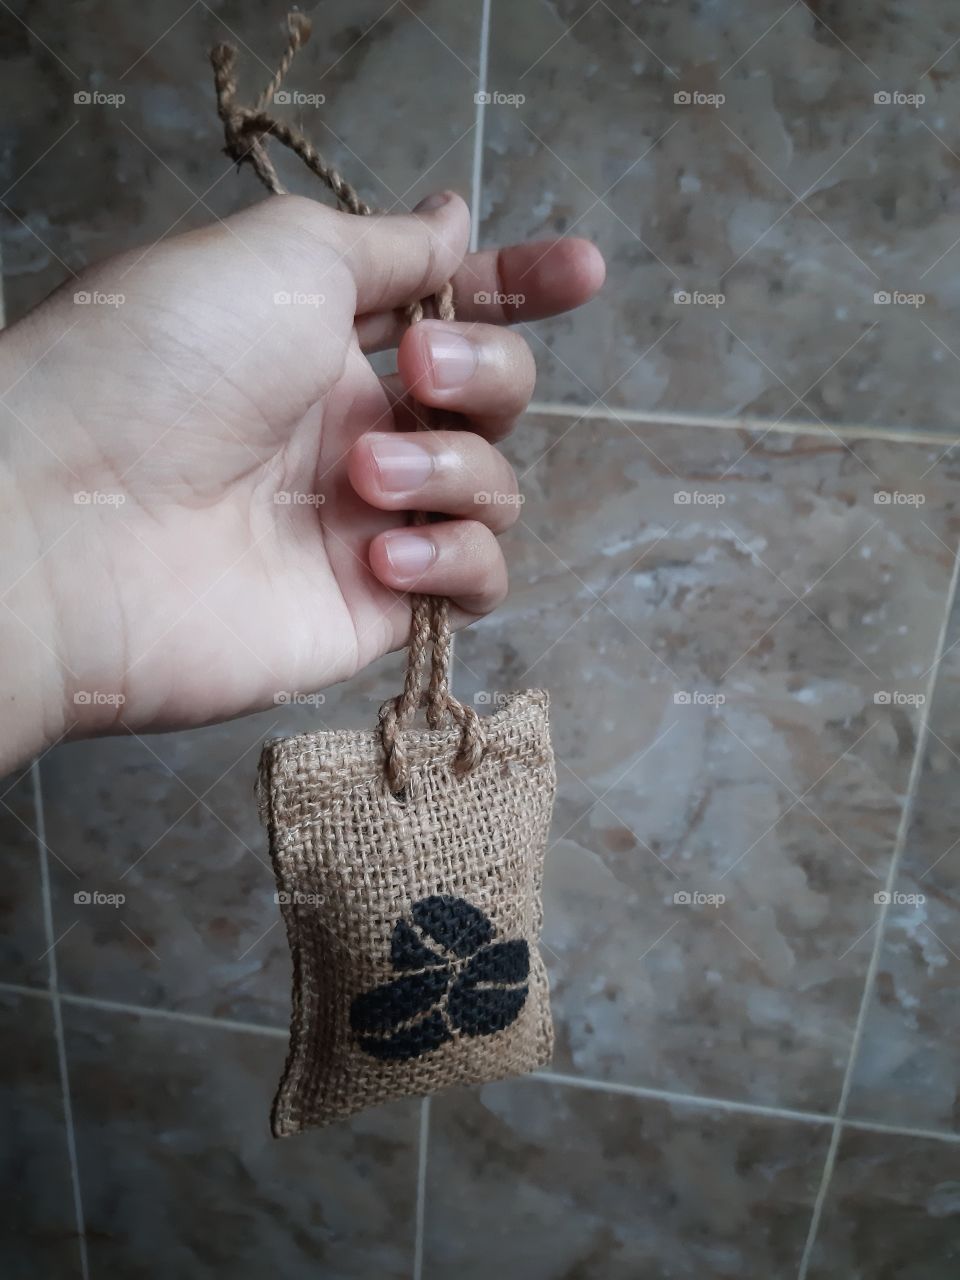 An air freshener is held by the left hand